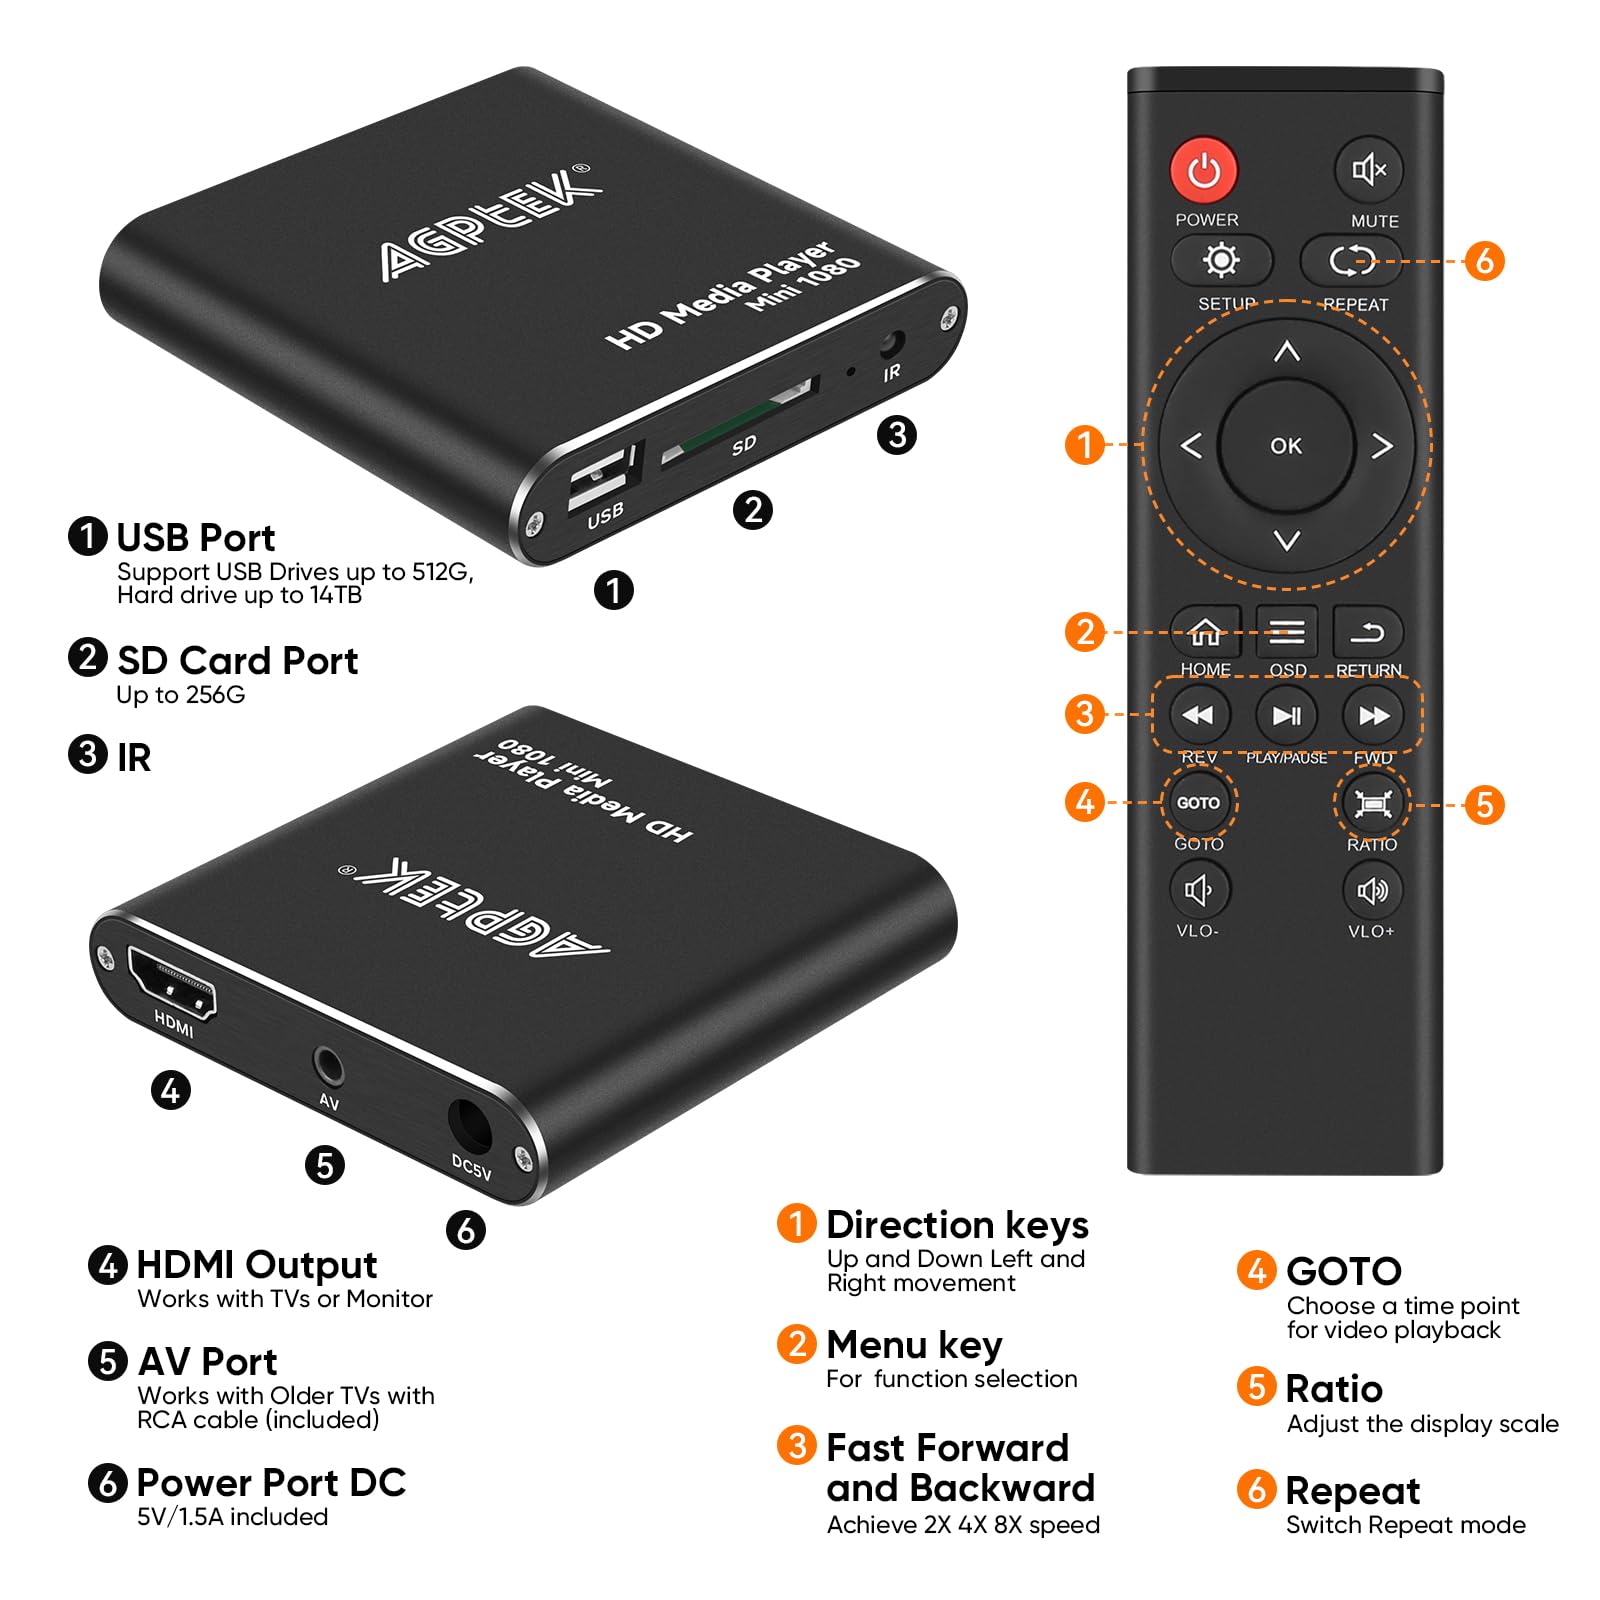 HDMI Media Player with One More AV Cable, Black Mini 1080p Full-HD Ultra HDMI Digital Media Player for -MKV/RM- HDD USB Drives and SD Cards